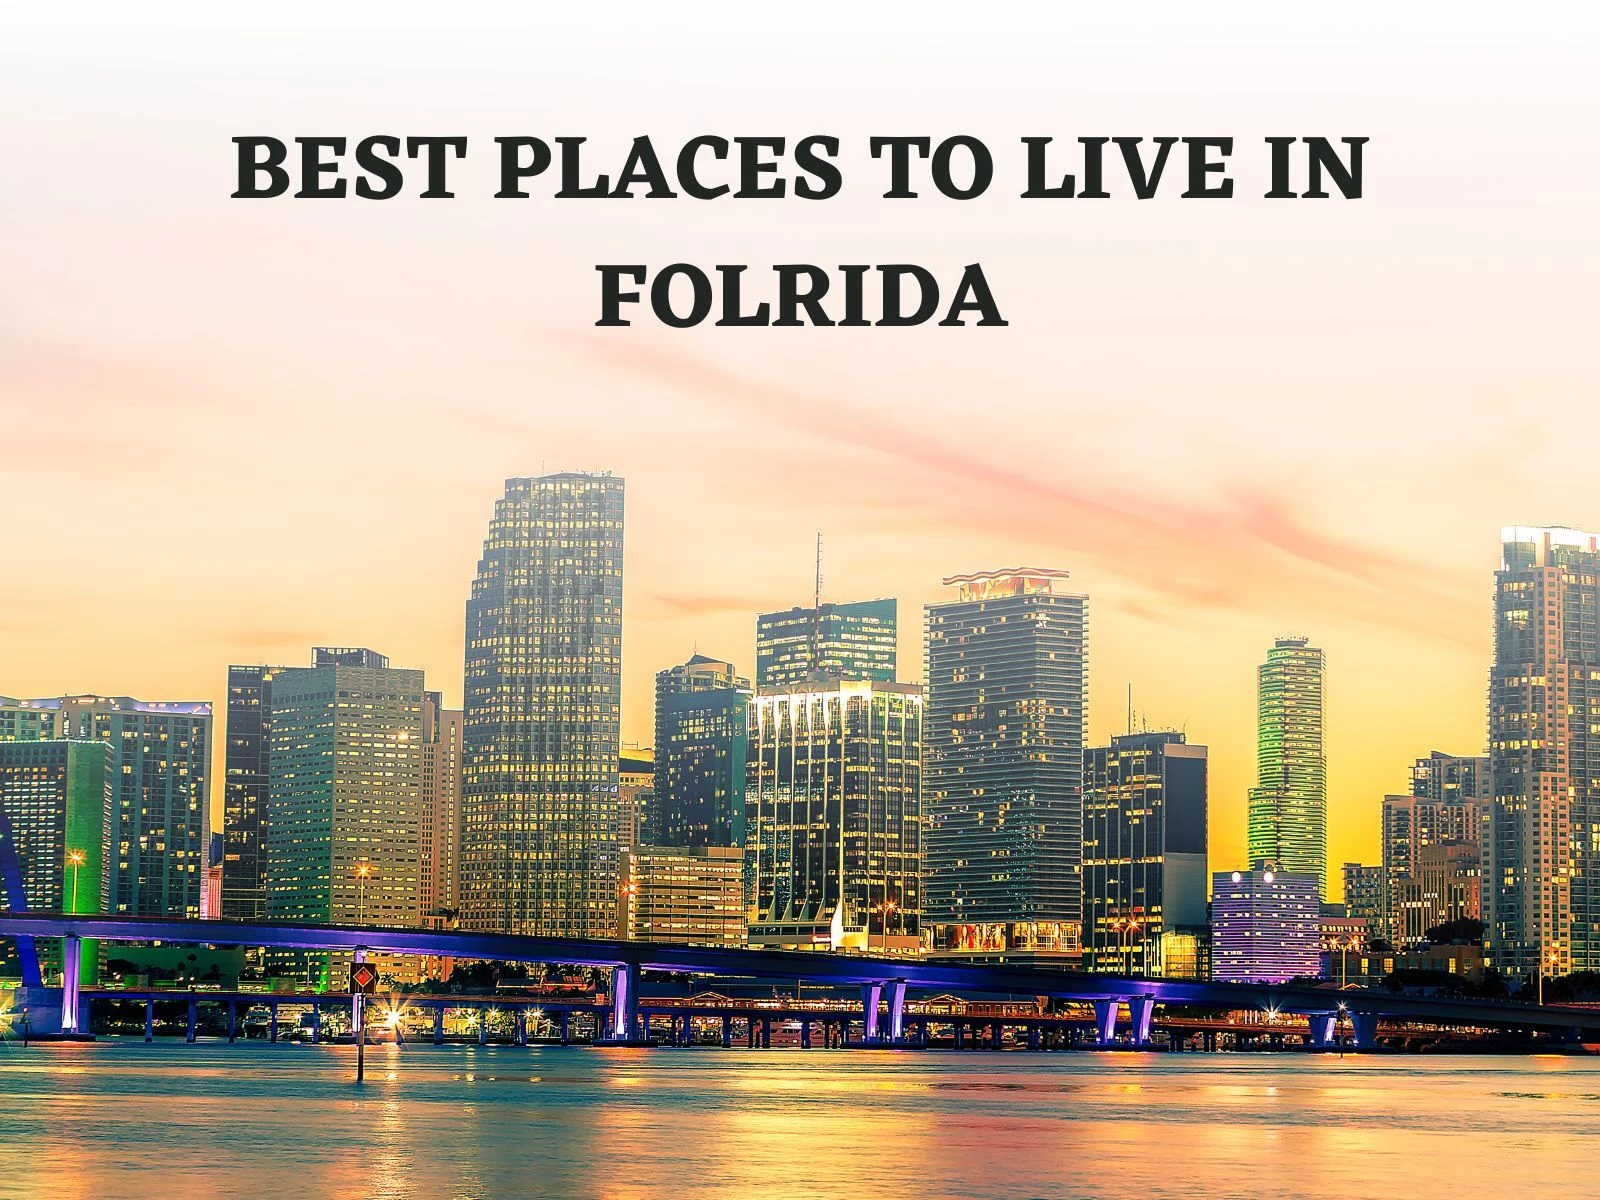 Best Places to live in Florida